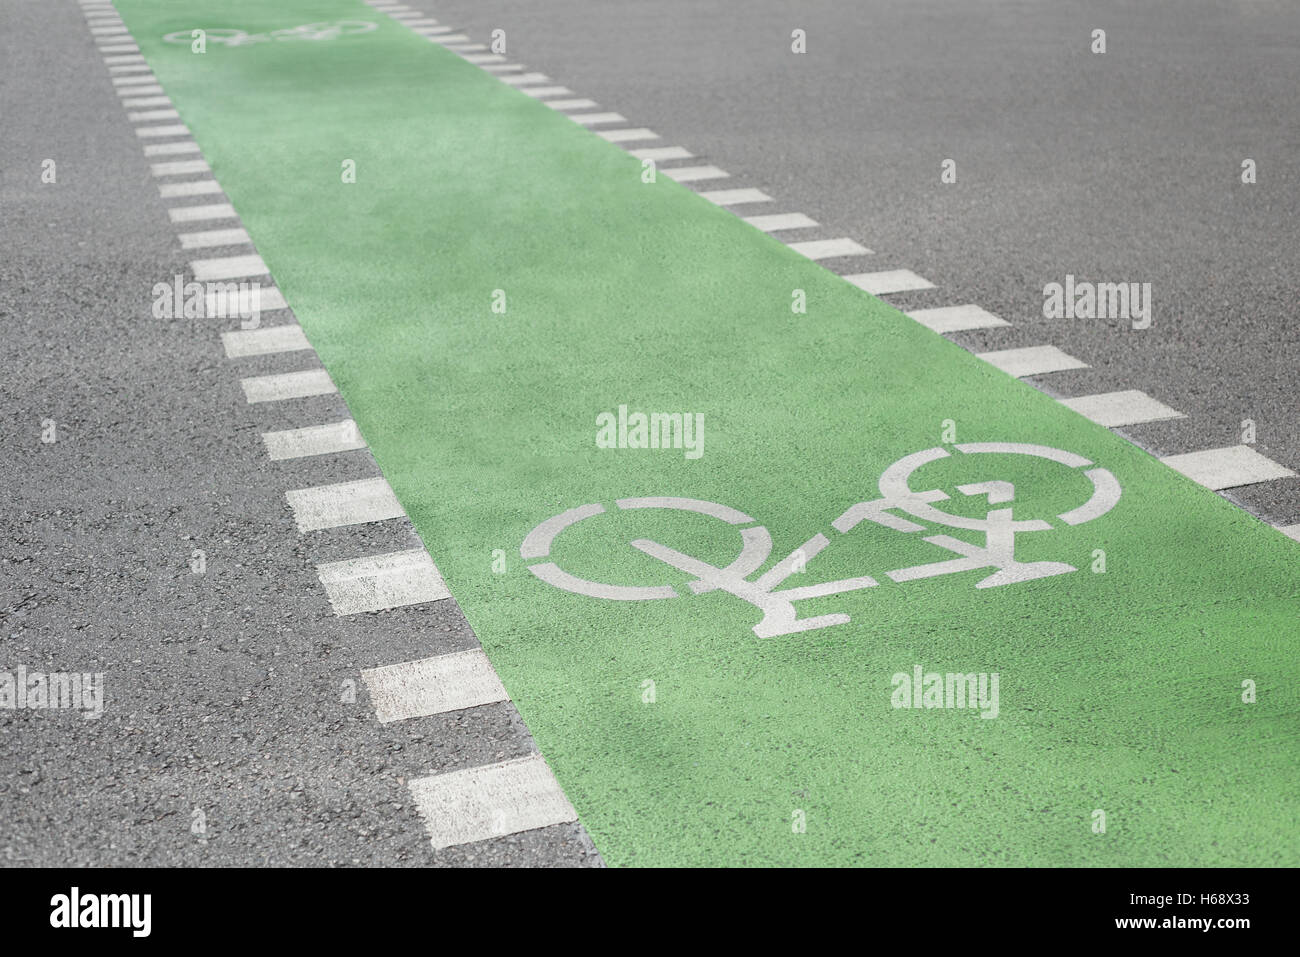 Cycle lane on road surface Stock Photo